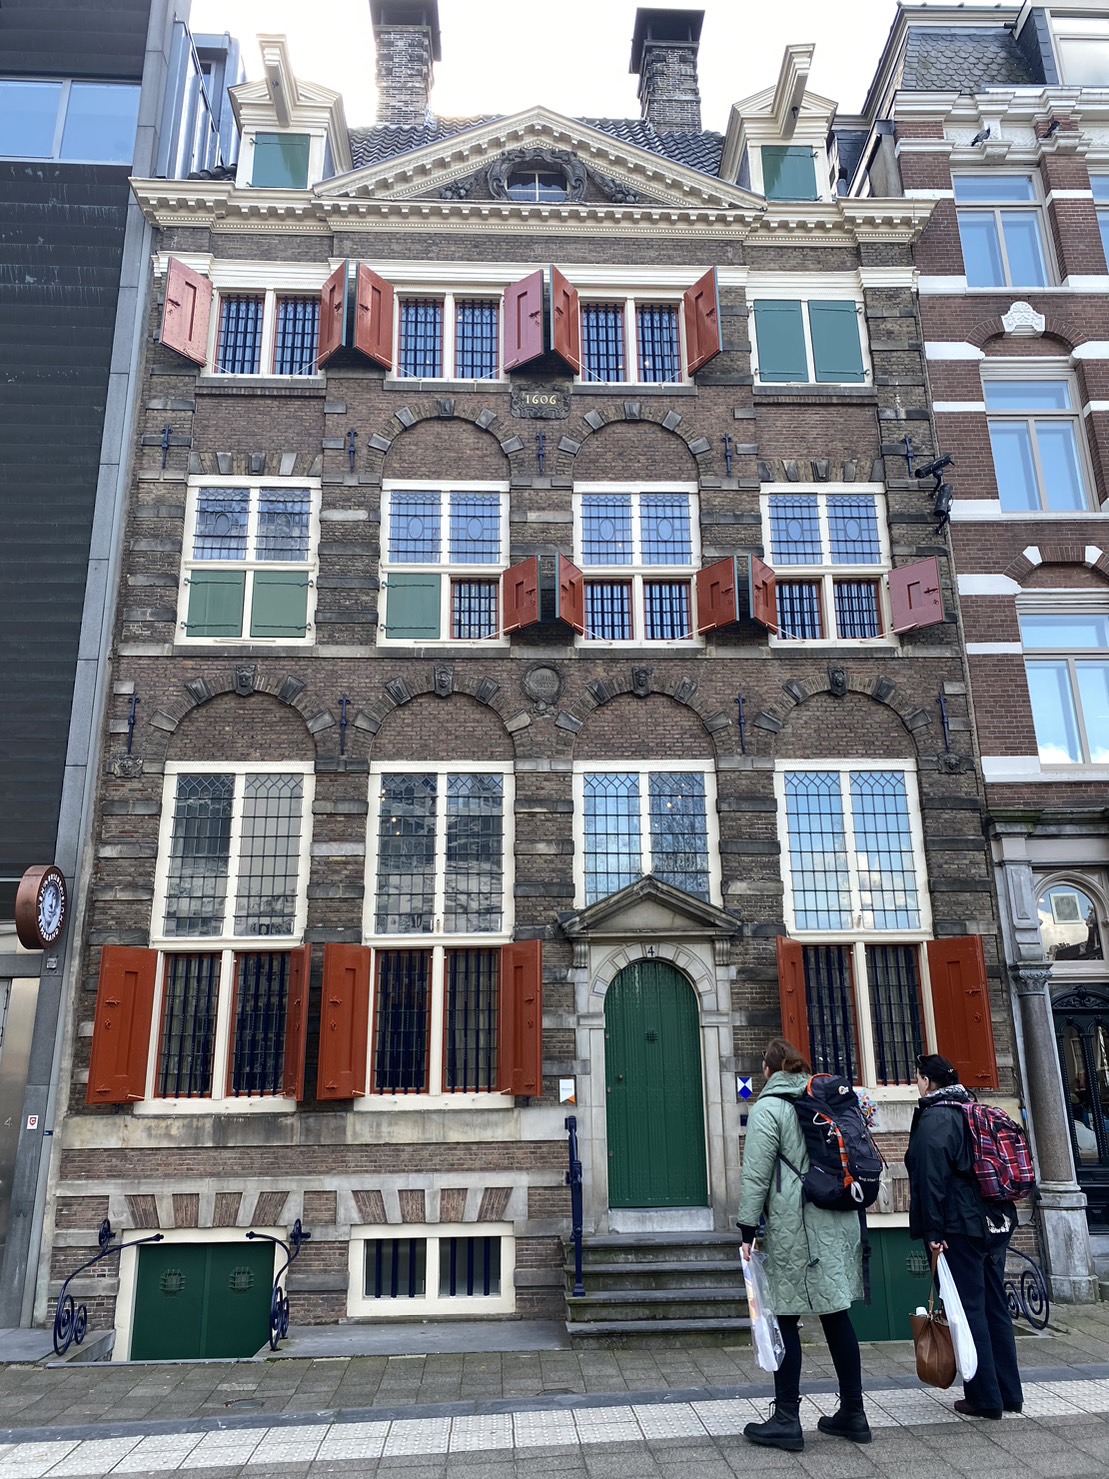 Rembrandt House Museum (Photo Credit: Anya C.)